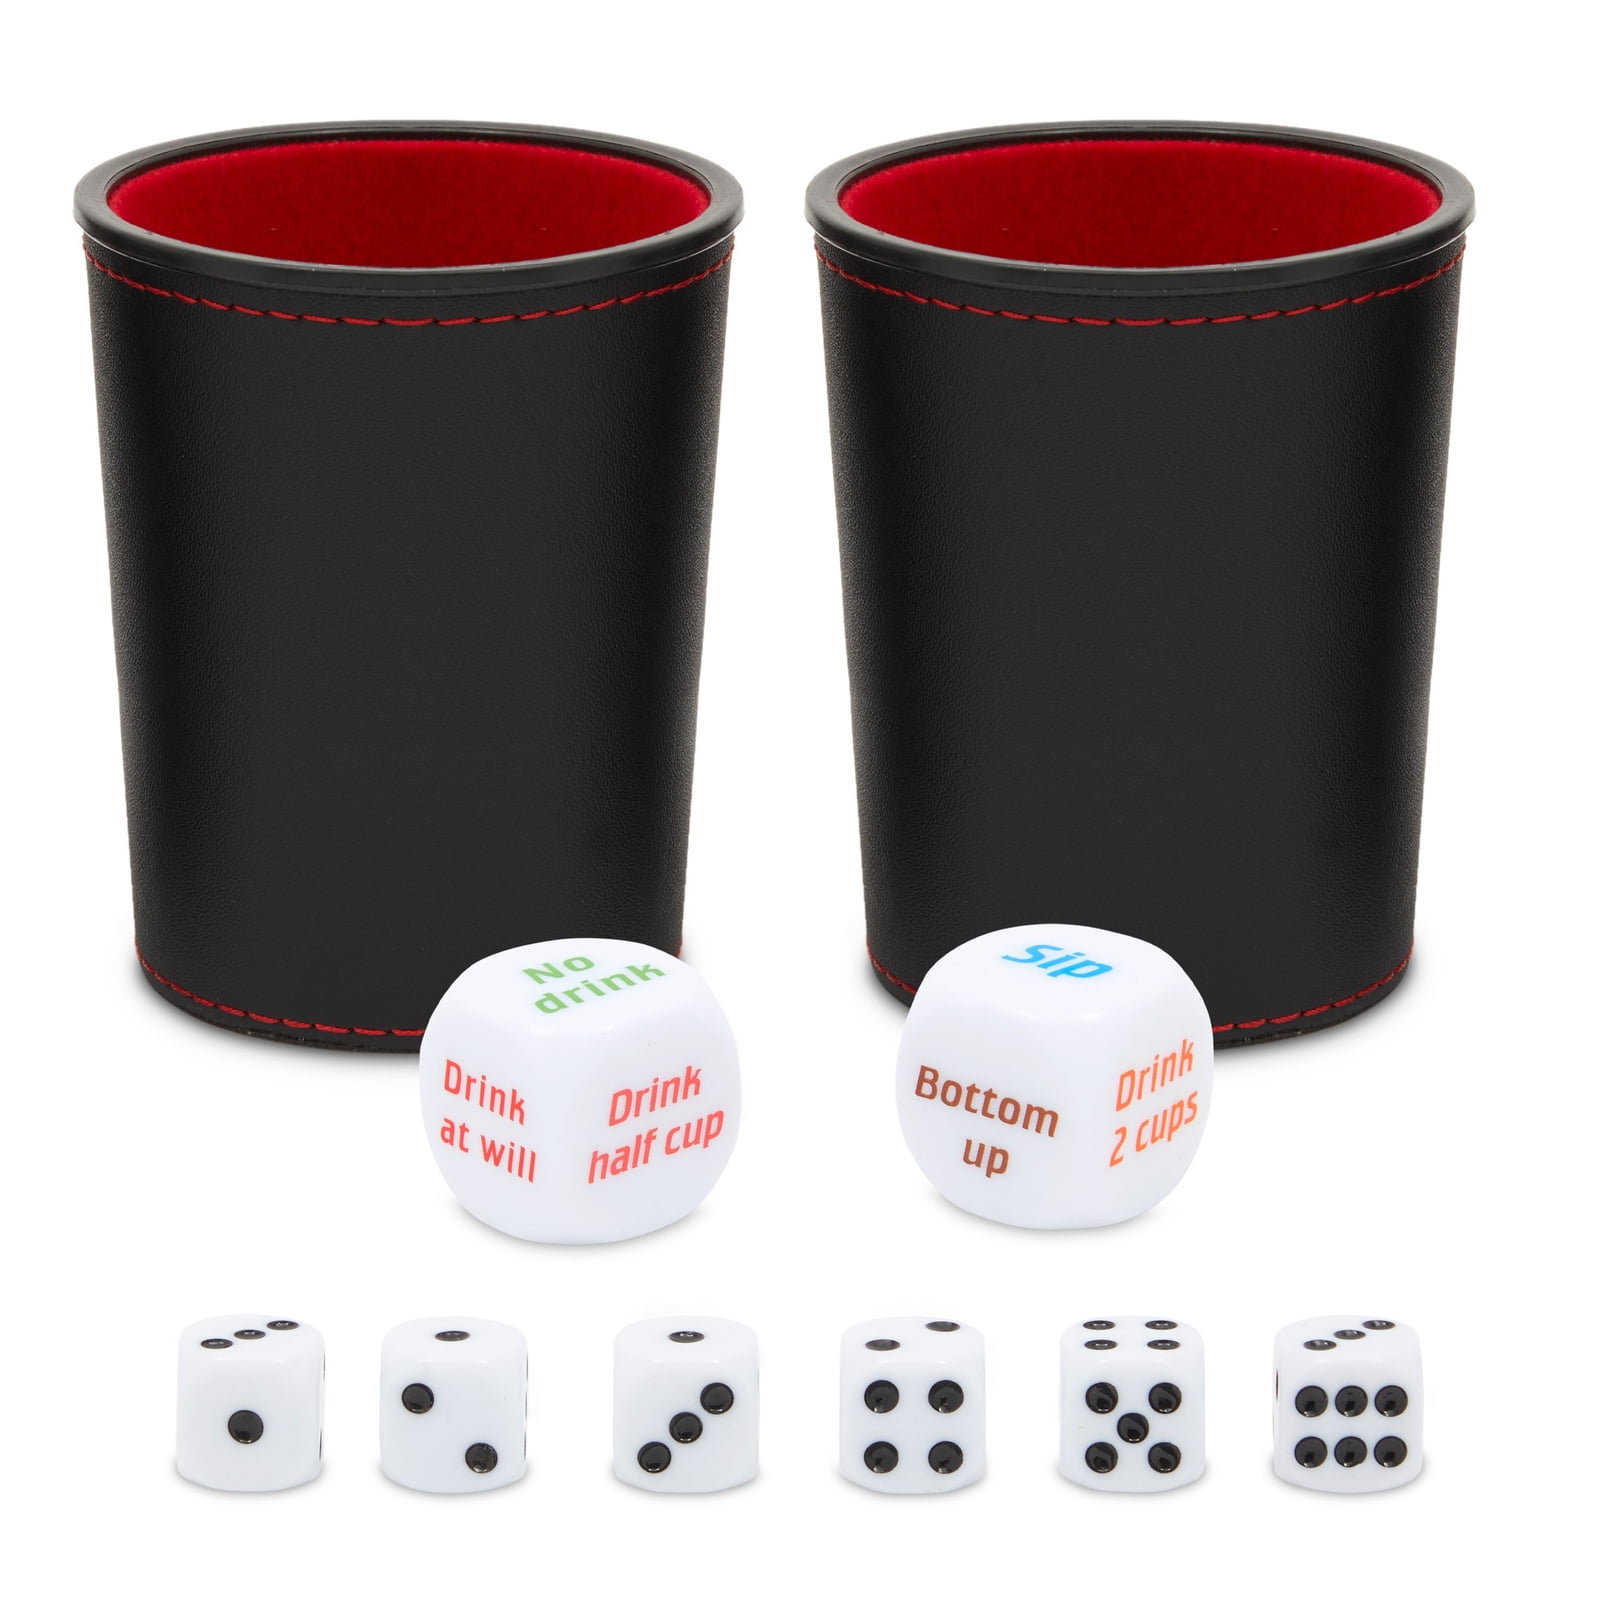 2 pack 100 % LEATHER POKER BAR GAMES CASINO SHAKER and 5 Dice 16mm DICE CUP 